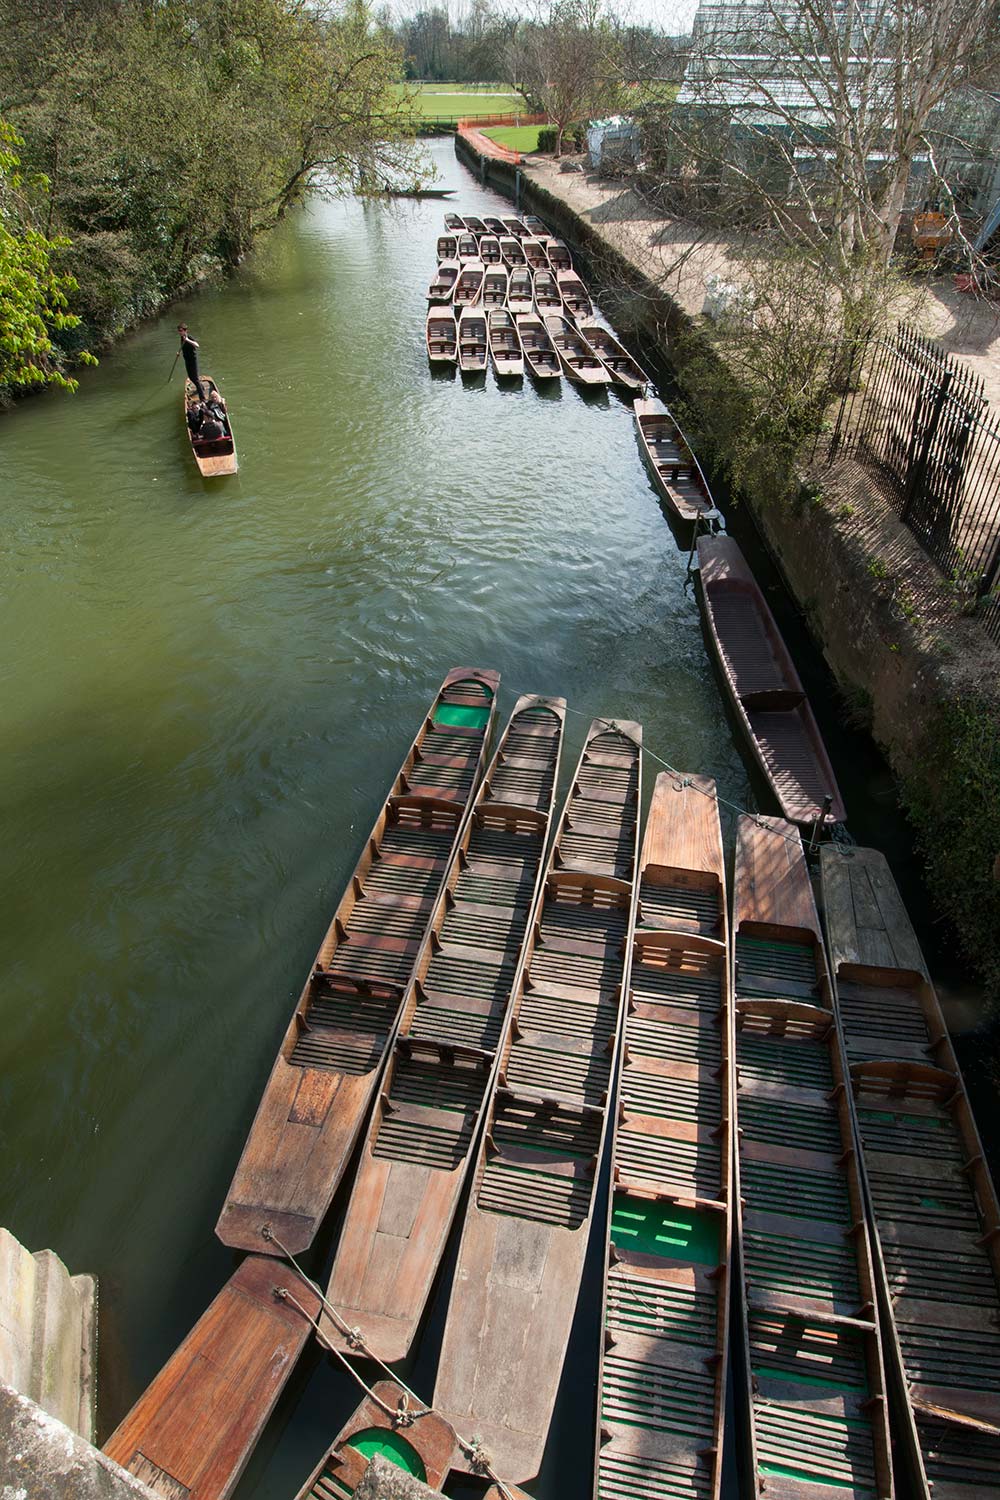 Punts on the River Cherwell, Oxford